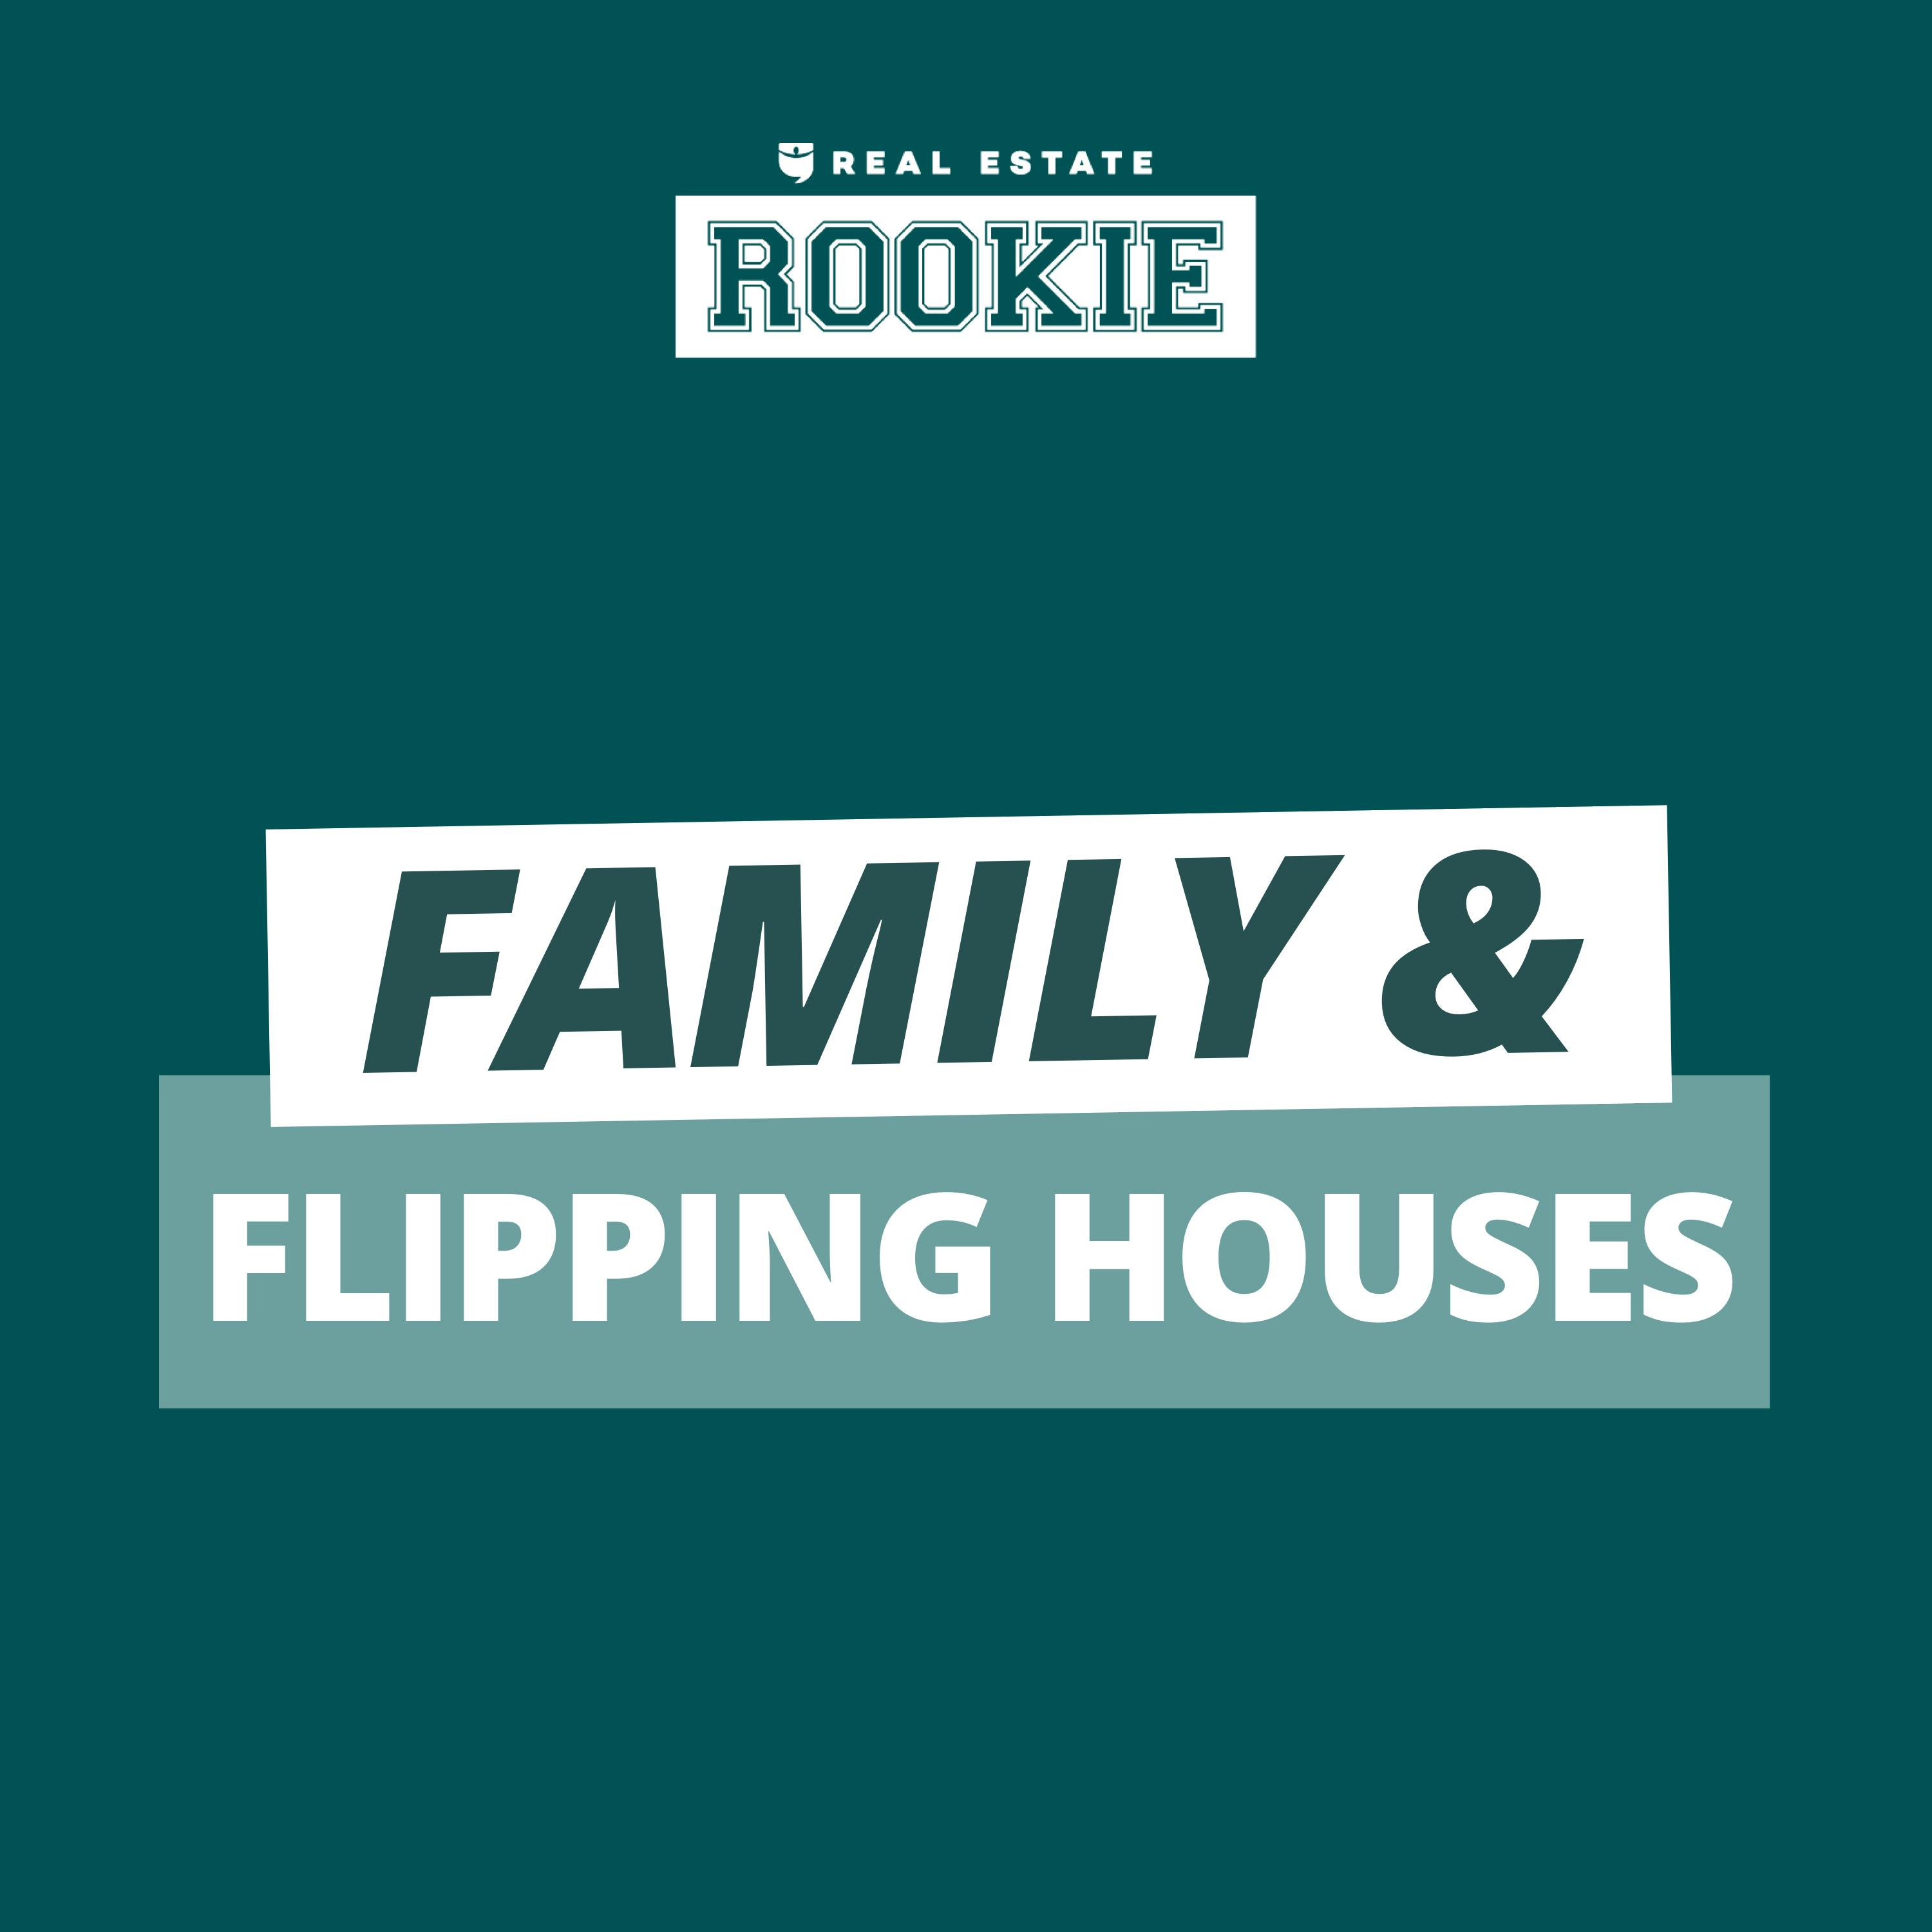 135: 2 Houses Flipped as a Part-Time Real Estate Agent & Full-Time Father